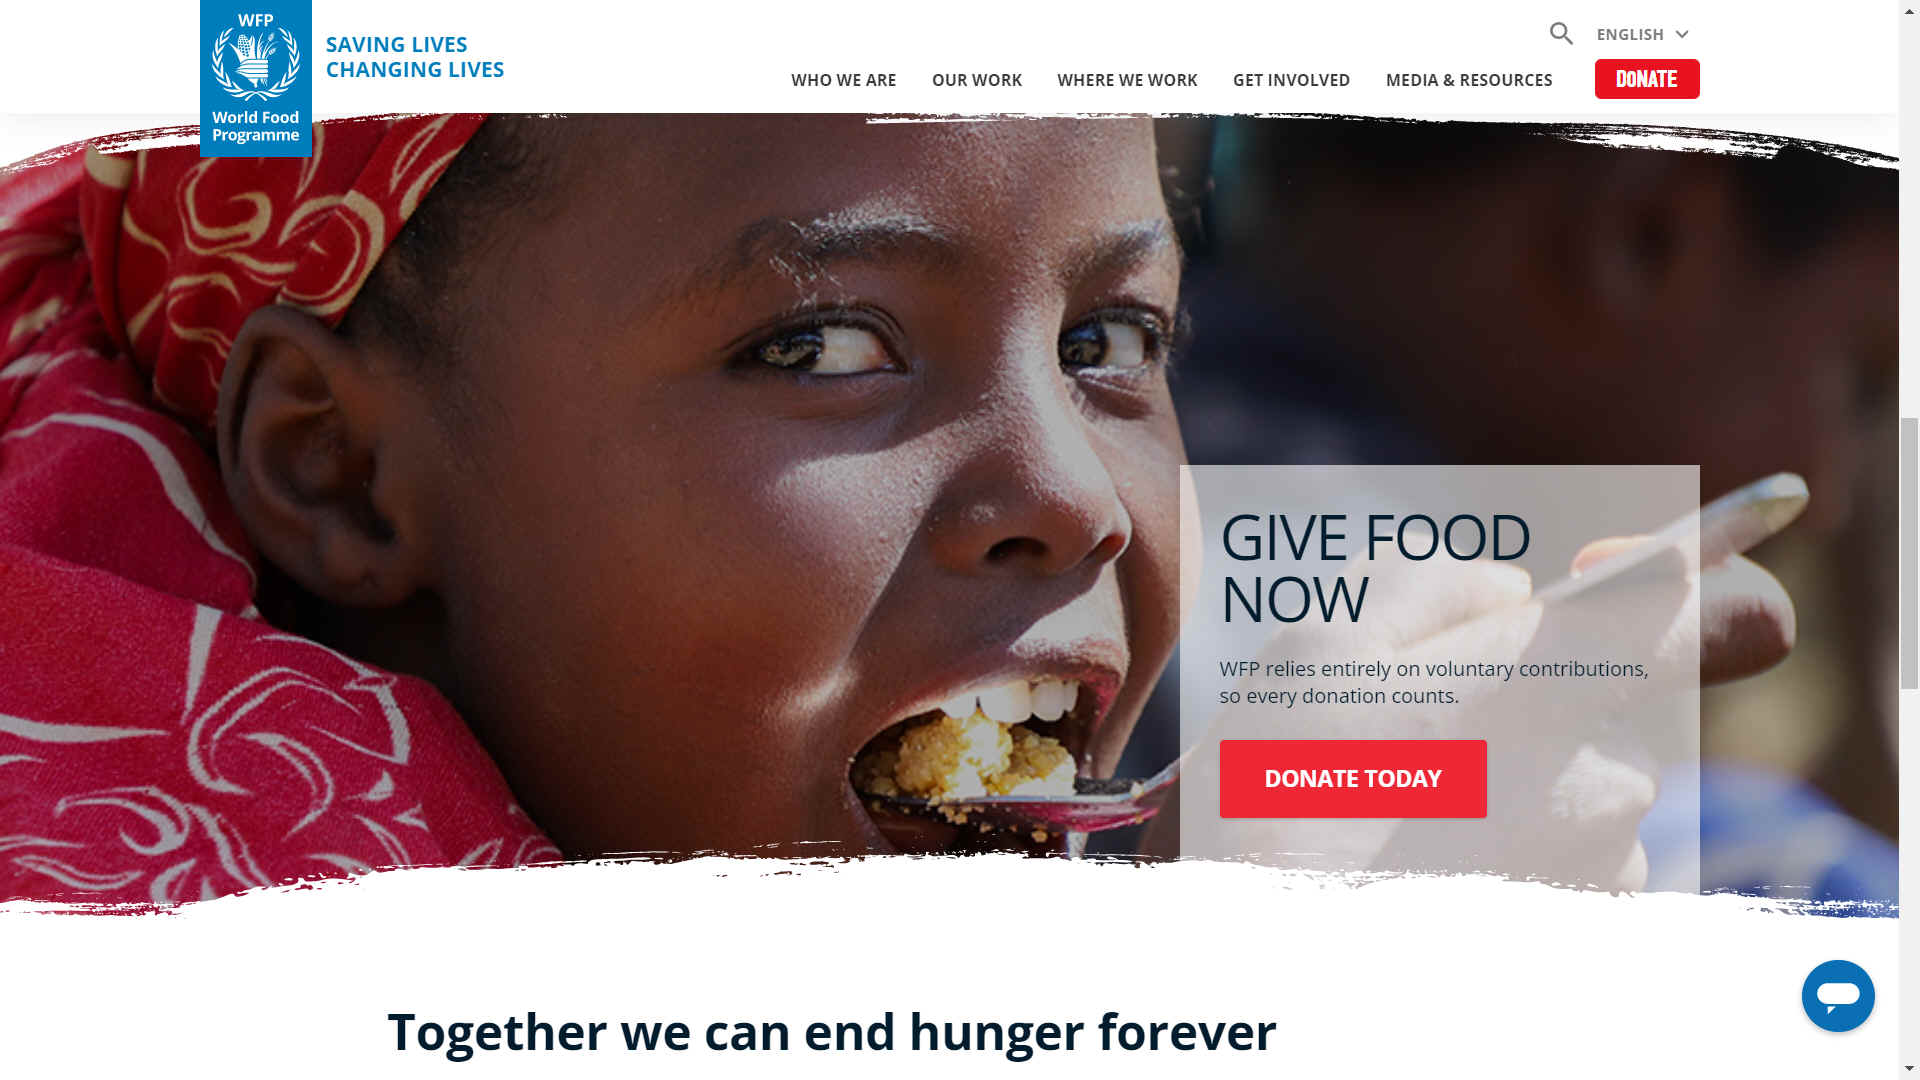 Food security, together we can end hunger forever